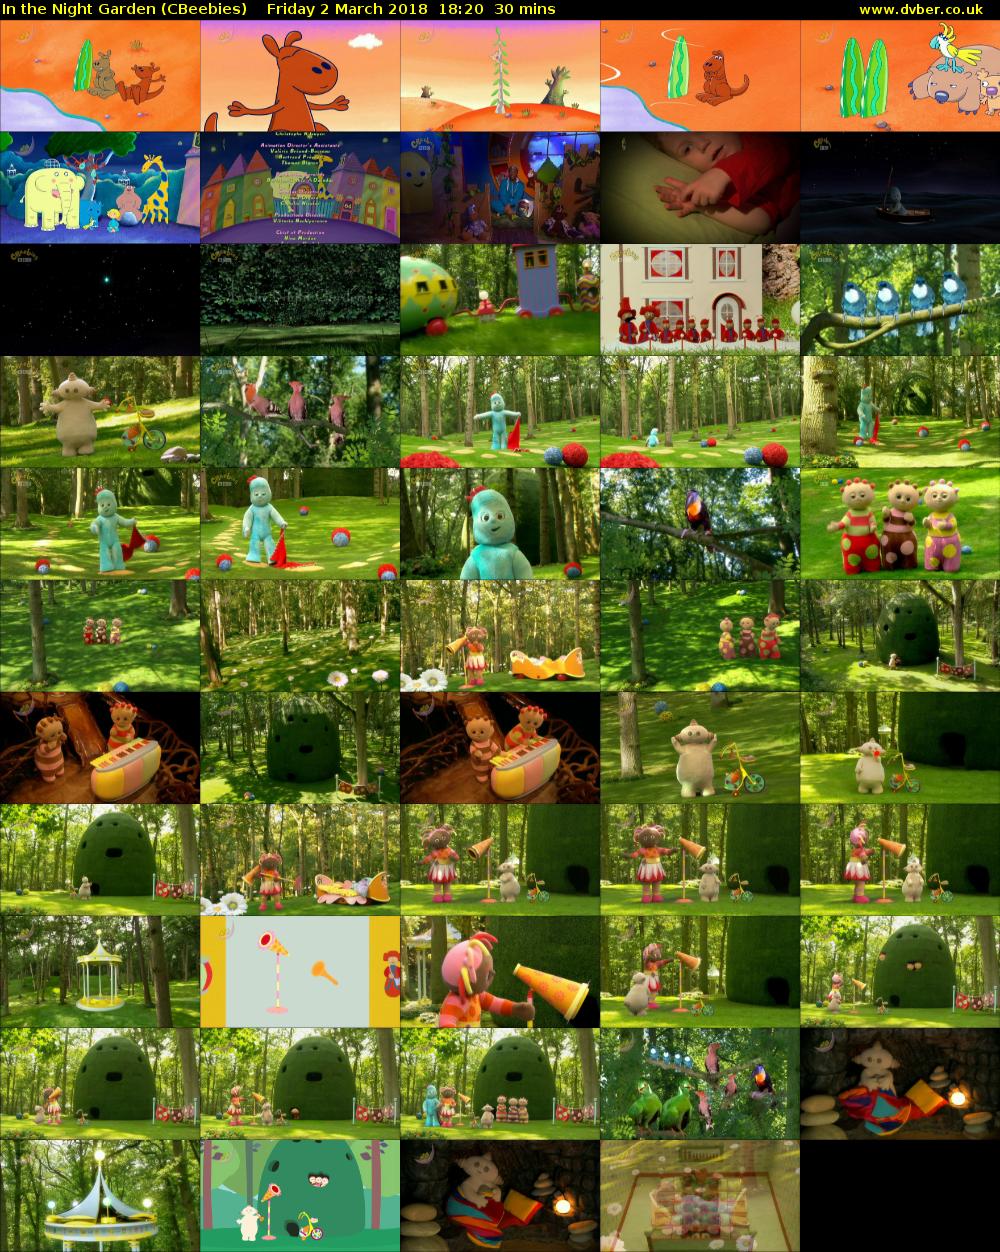 In the Night Garden (CBeebies) Friday 2 March 2018 18:20 - 18:50